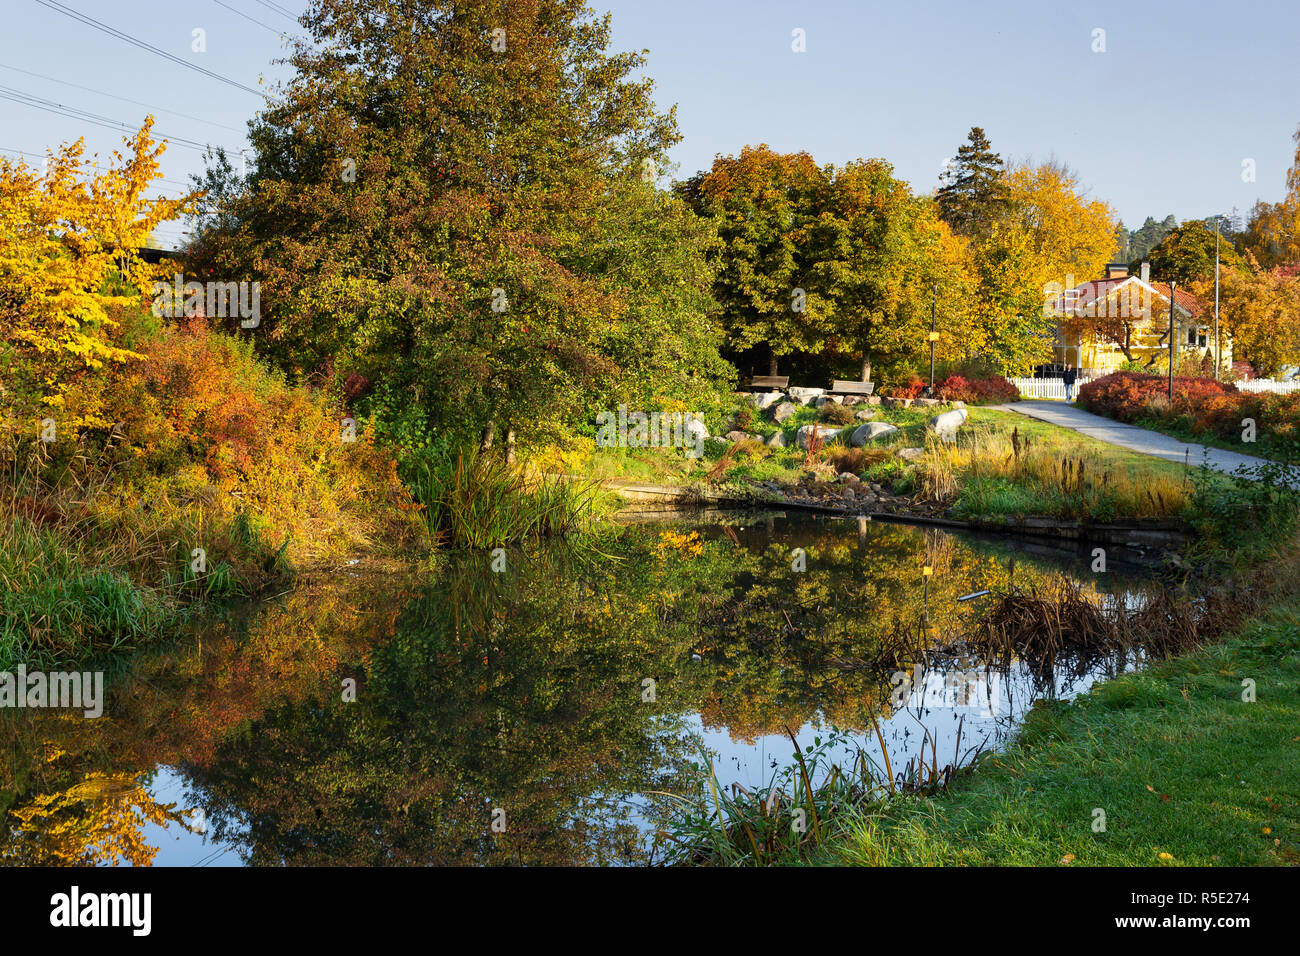 River side and fall season urban cityscape in central Upplands Vasby. Stockholm, Sweden. Stock Photo